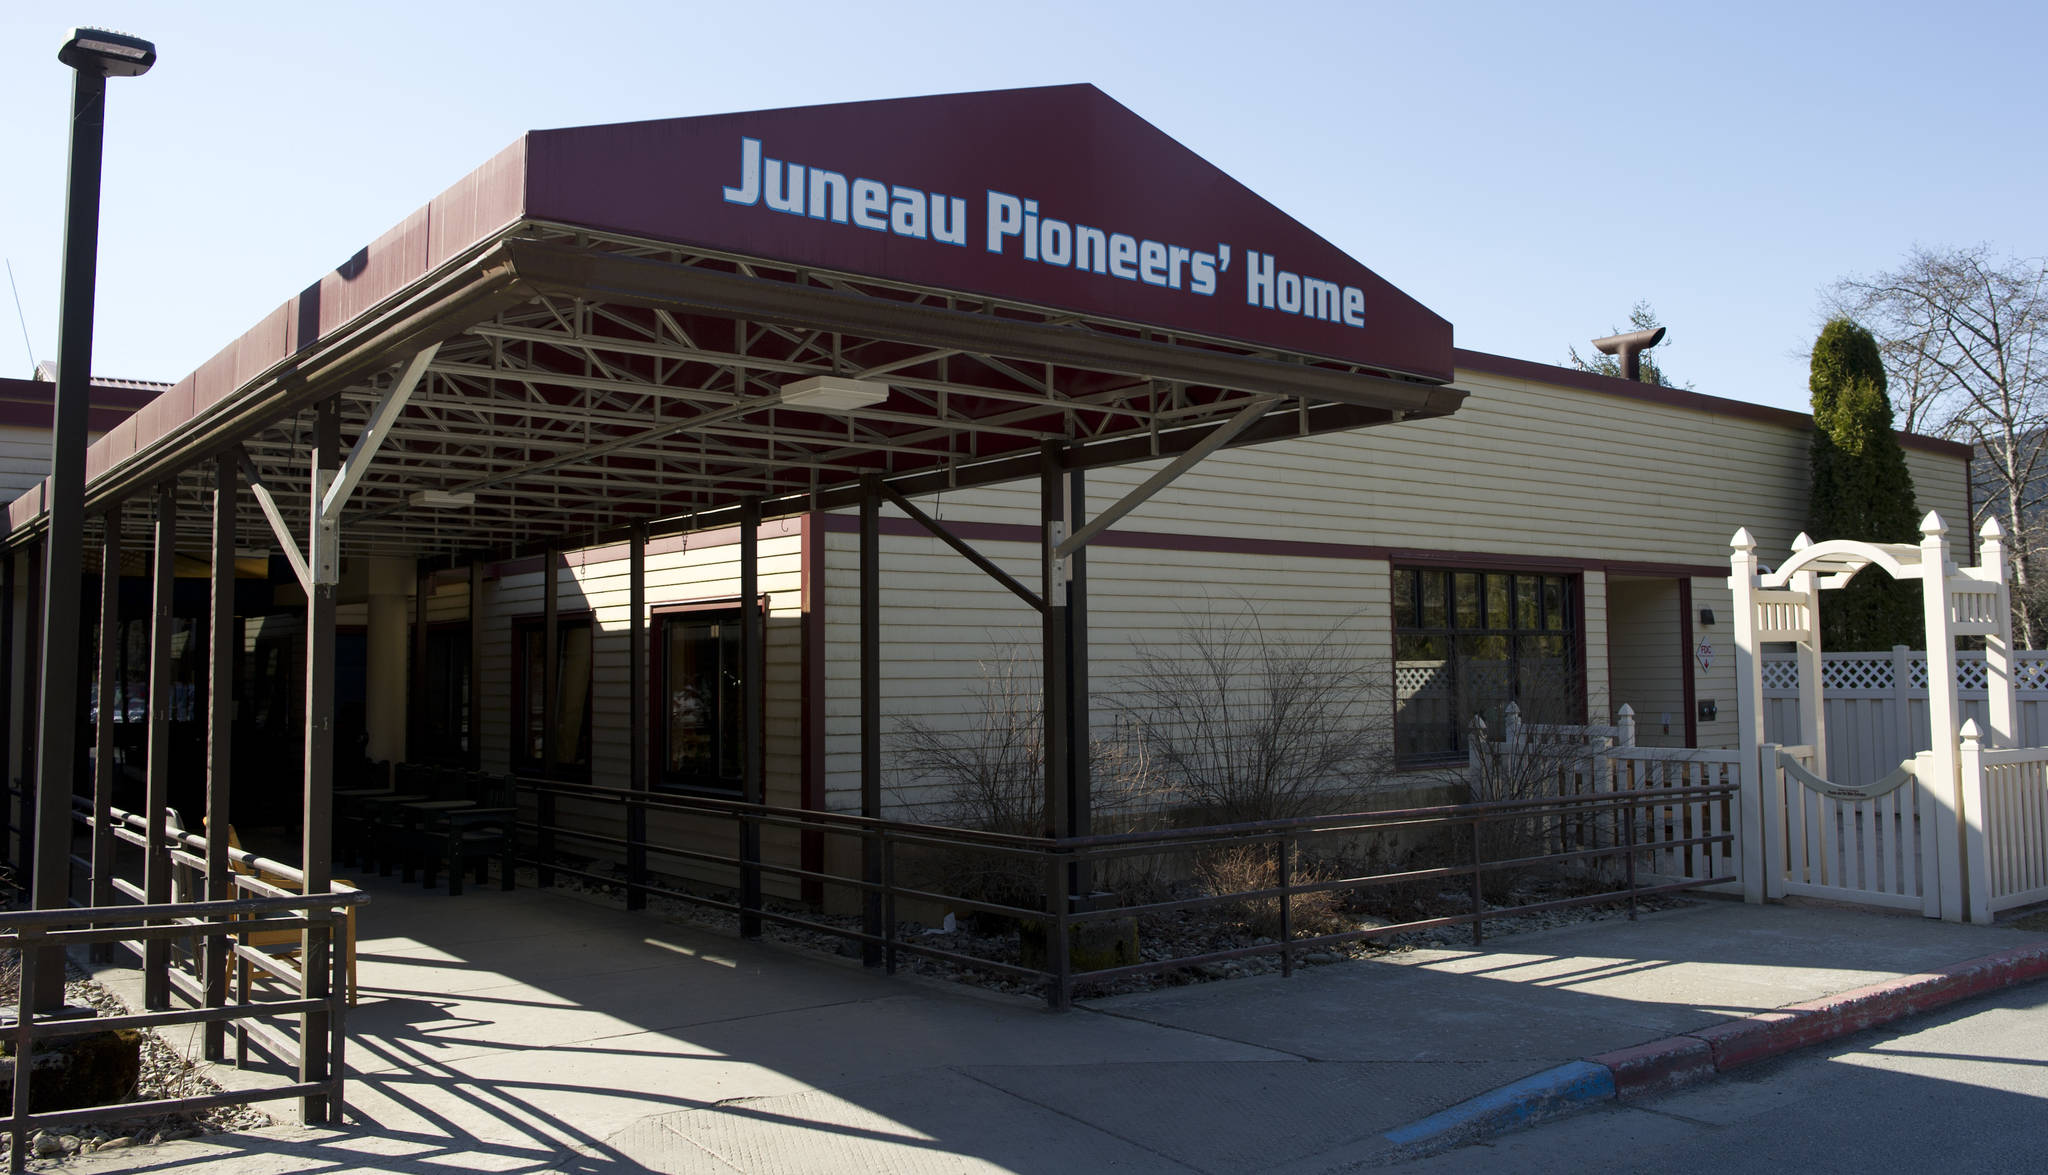 The Juneau Pioneers’ Home on Tuesday, April 11, 2017. (Michael Penn | Juneau Empire File)